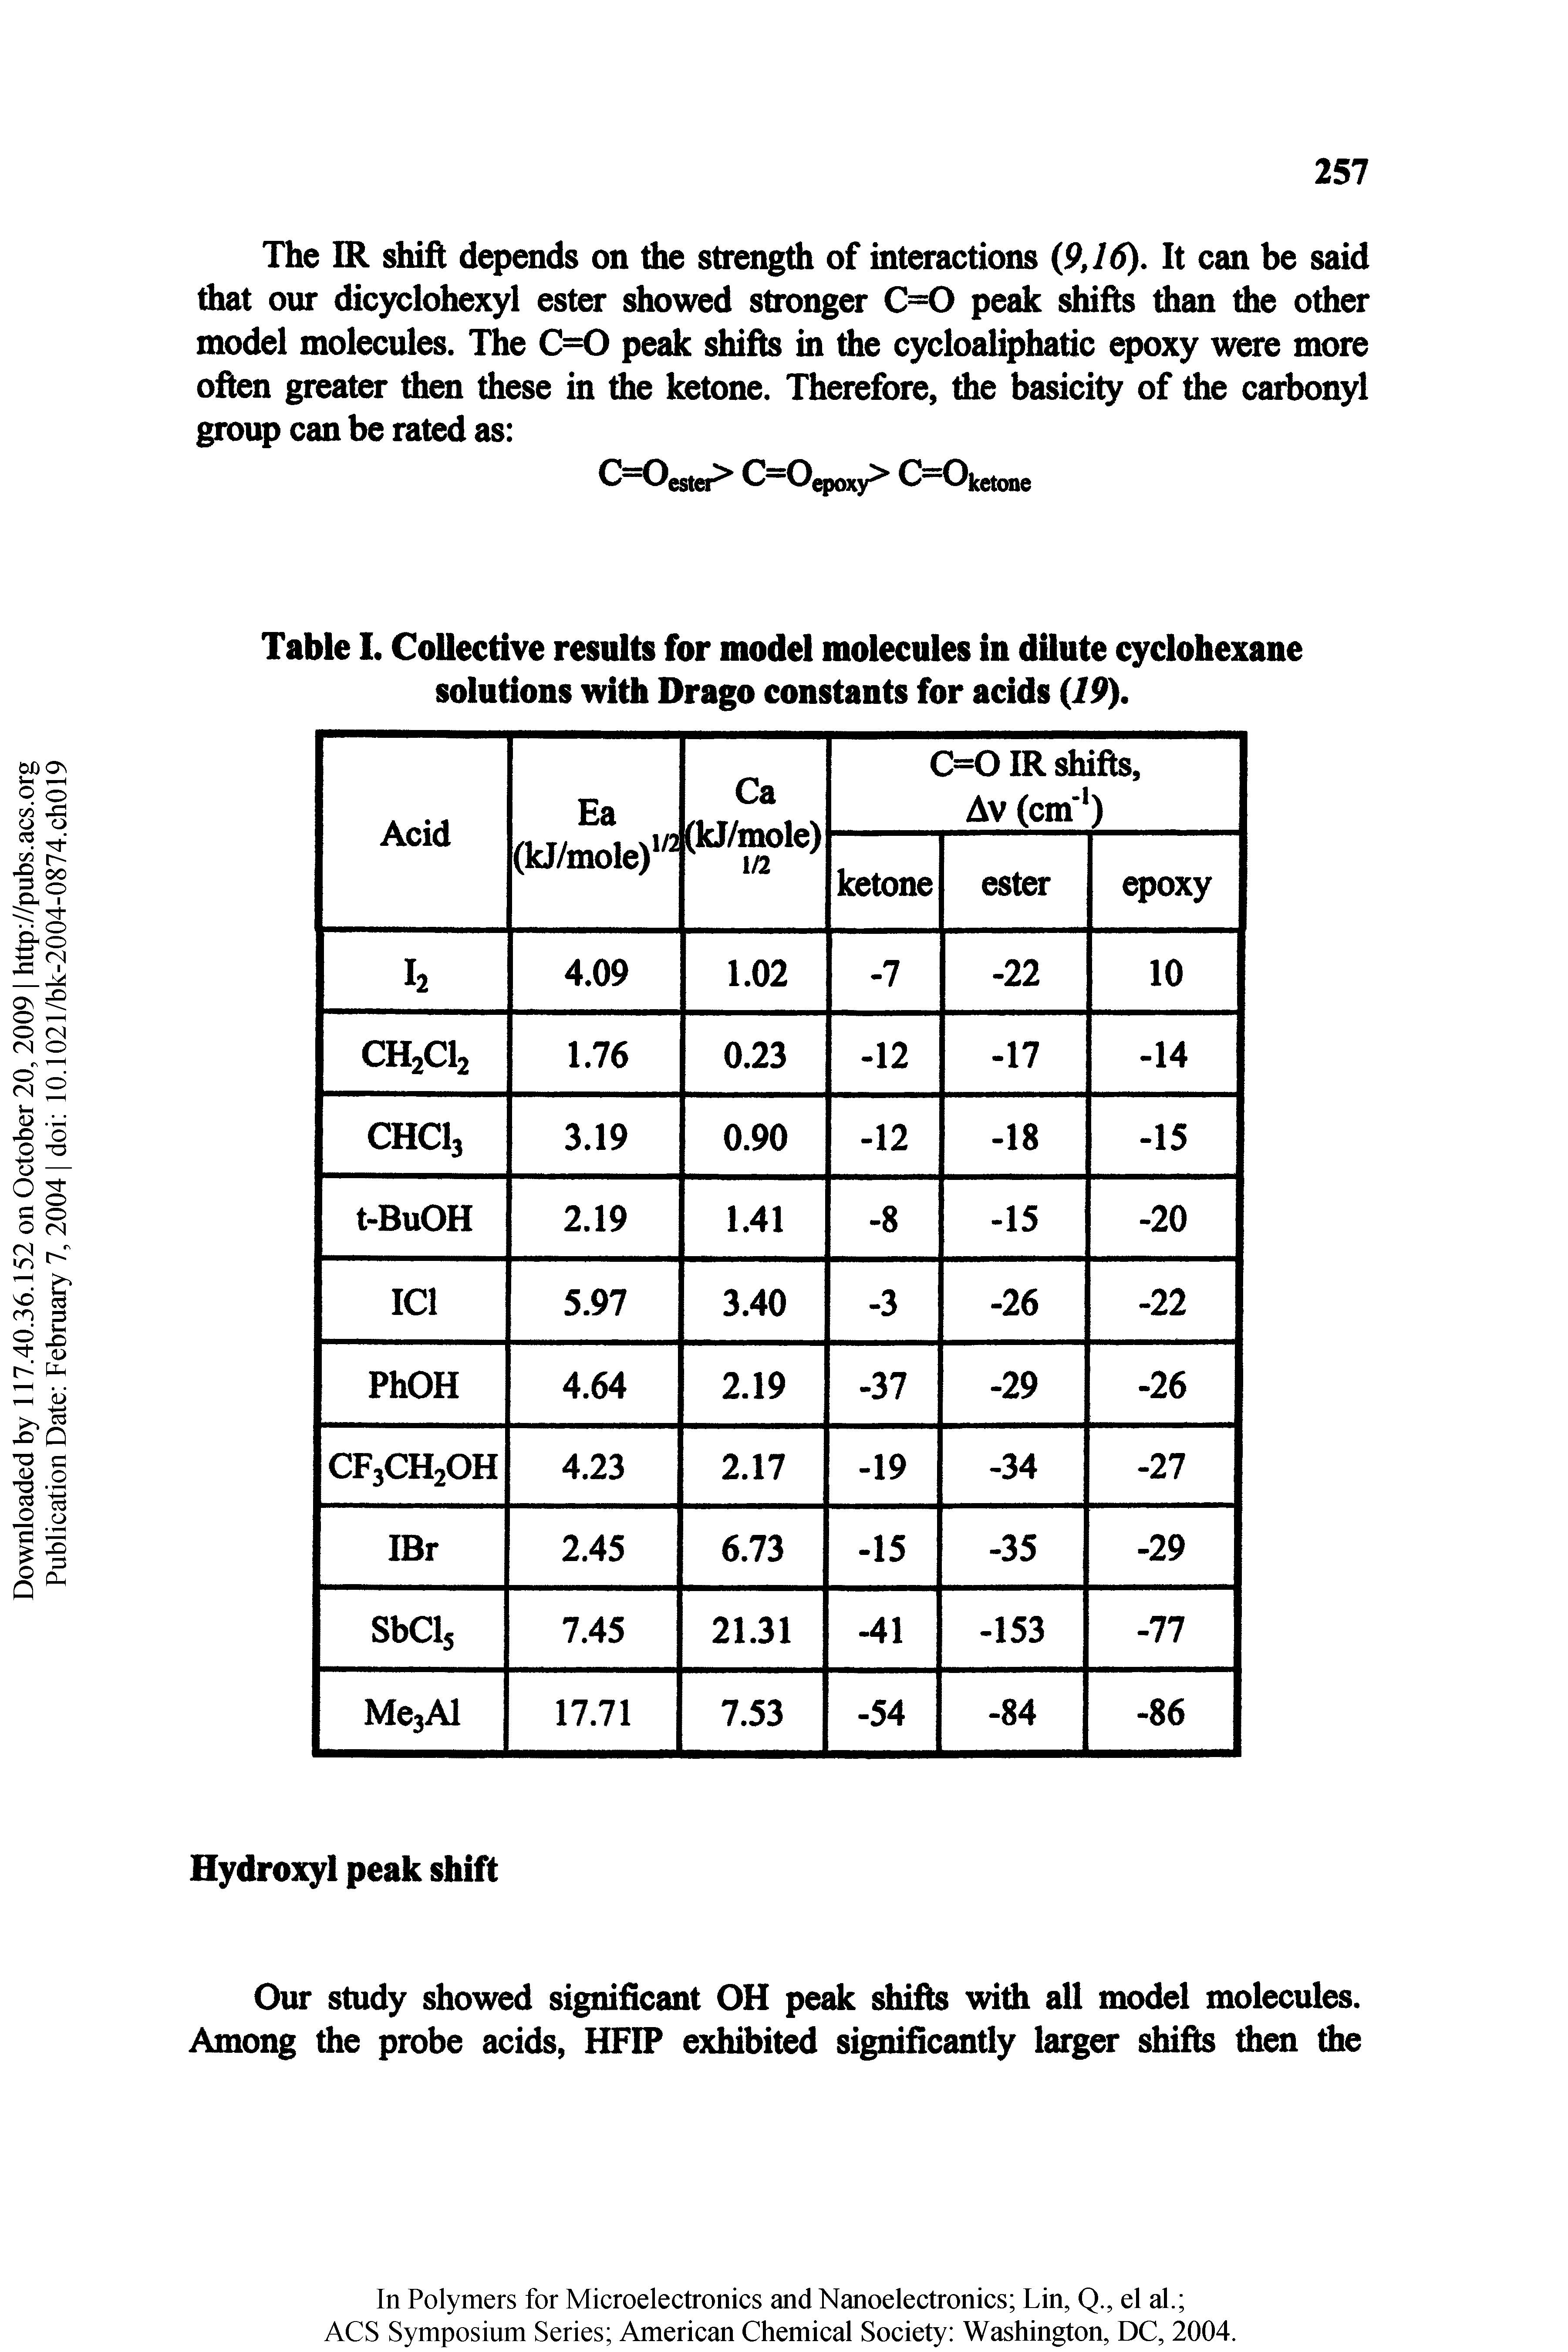 Table I. Collective results for model molecules In dilute cyclohexane solutions with Drago constants for acids (19).